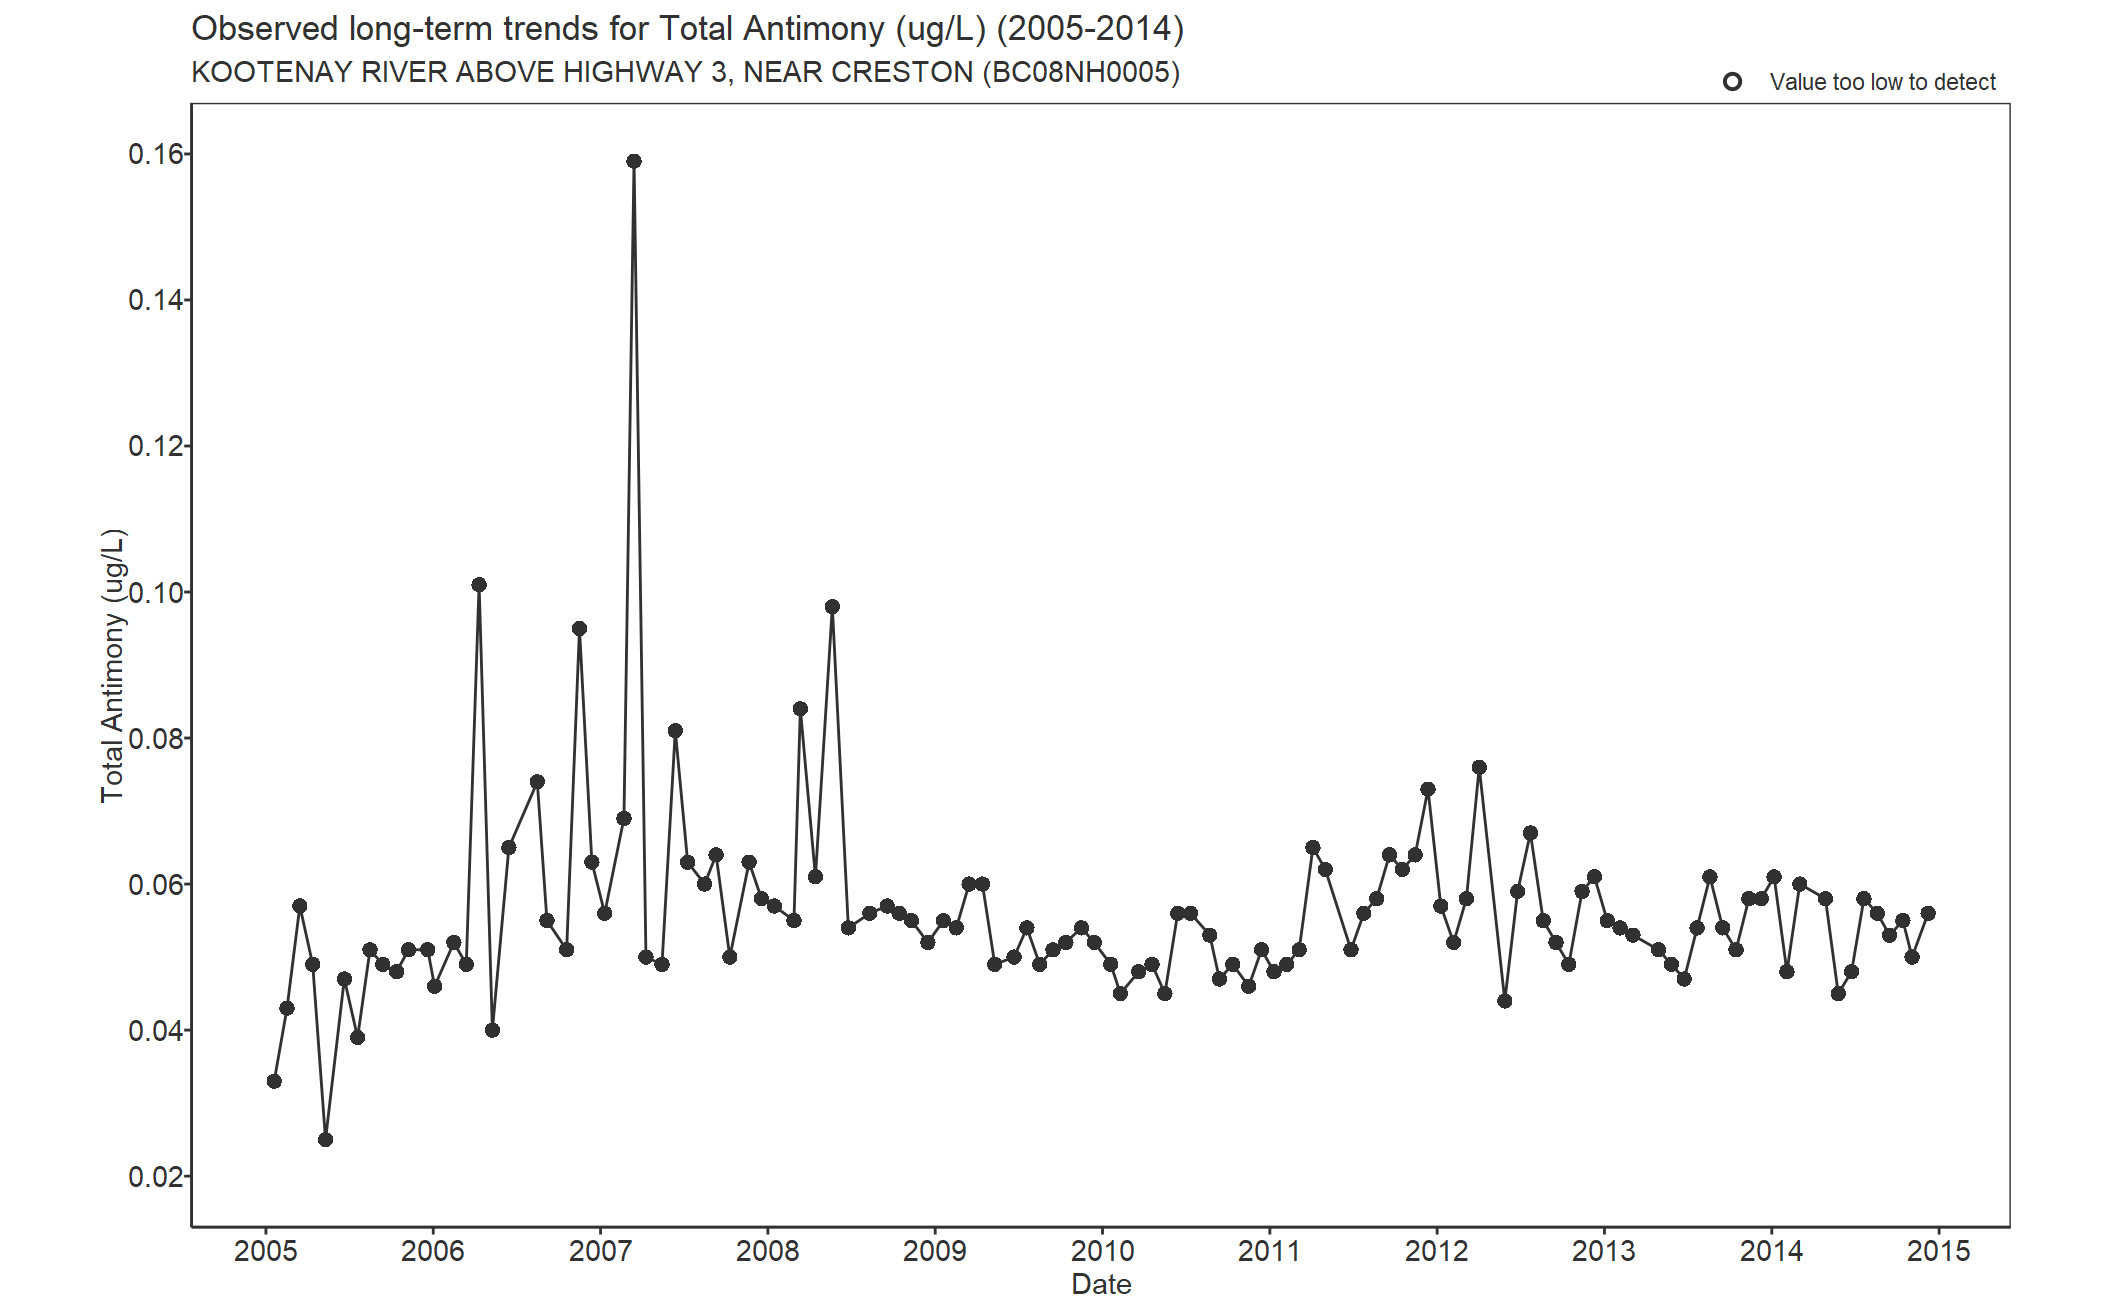 Observed long-term trends for Antimony Total (2005-2014)